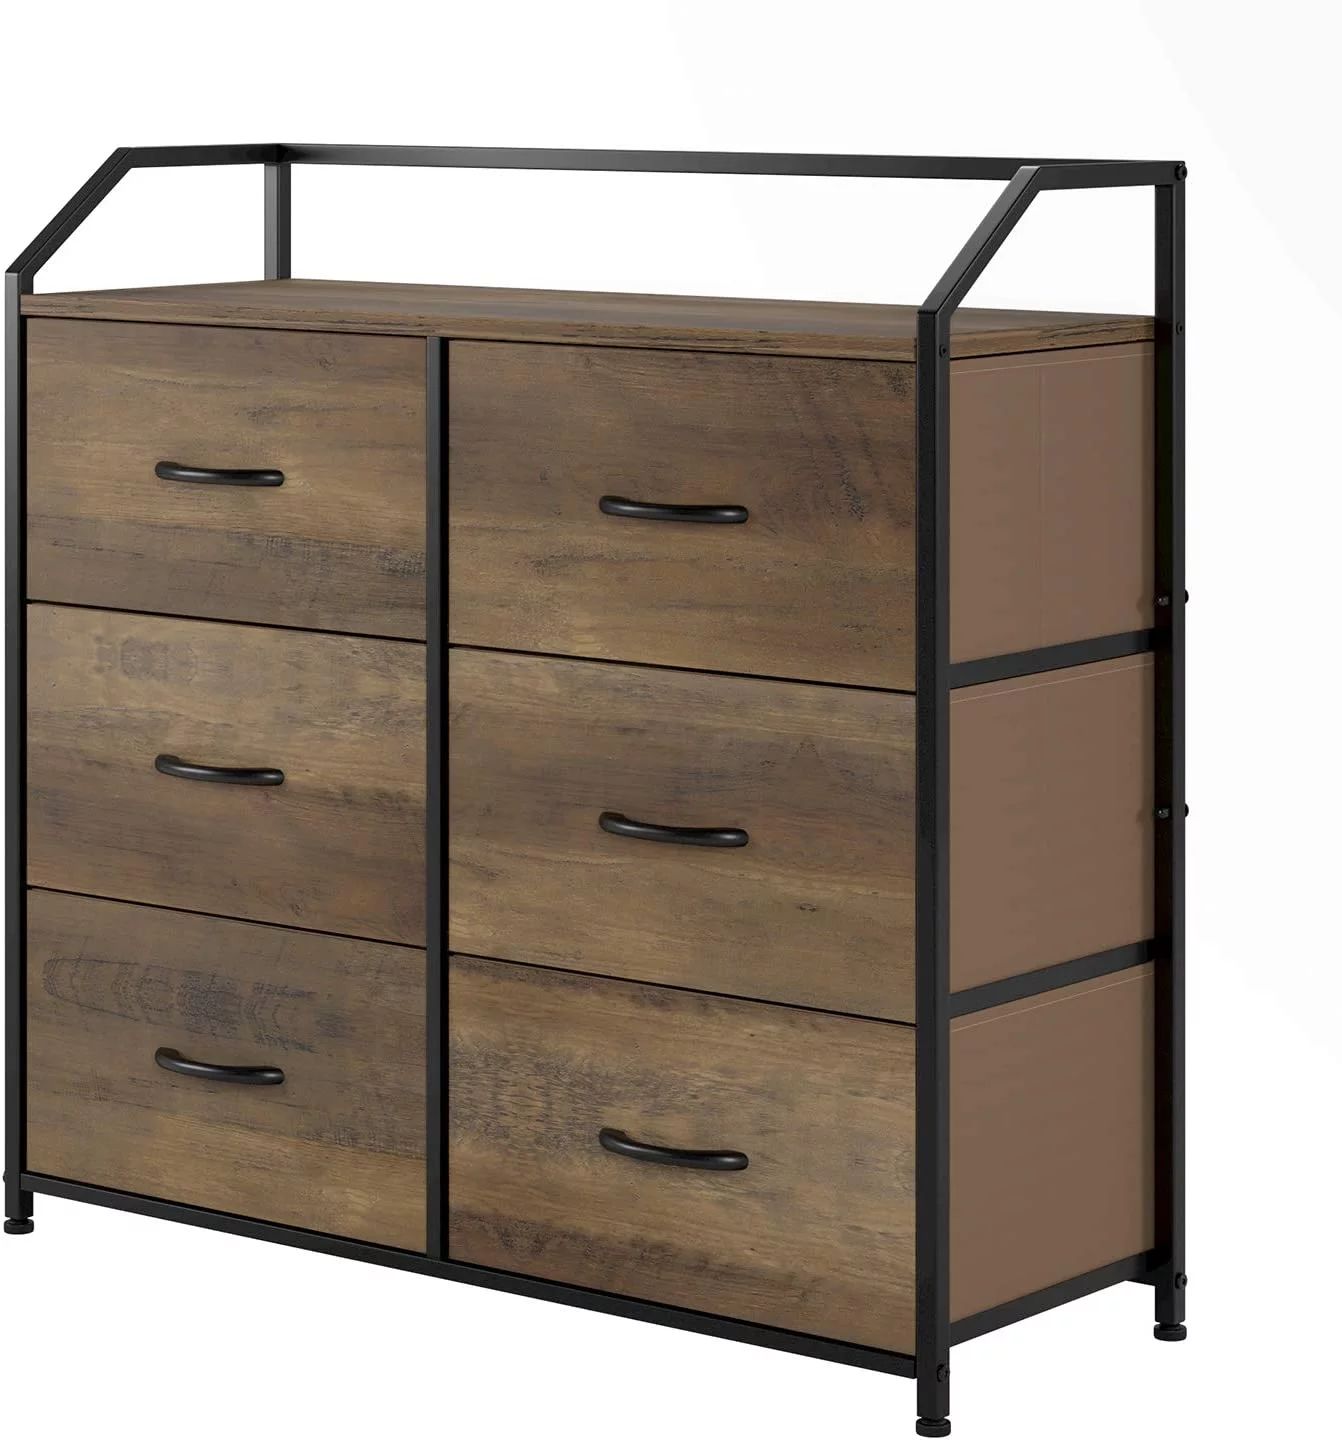 Dresser with 6 Fabric Drawers,Modern Storage Cabinet with Handles,Dresser for Bedroom,Rustic Brow... | Walmart (US)